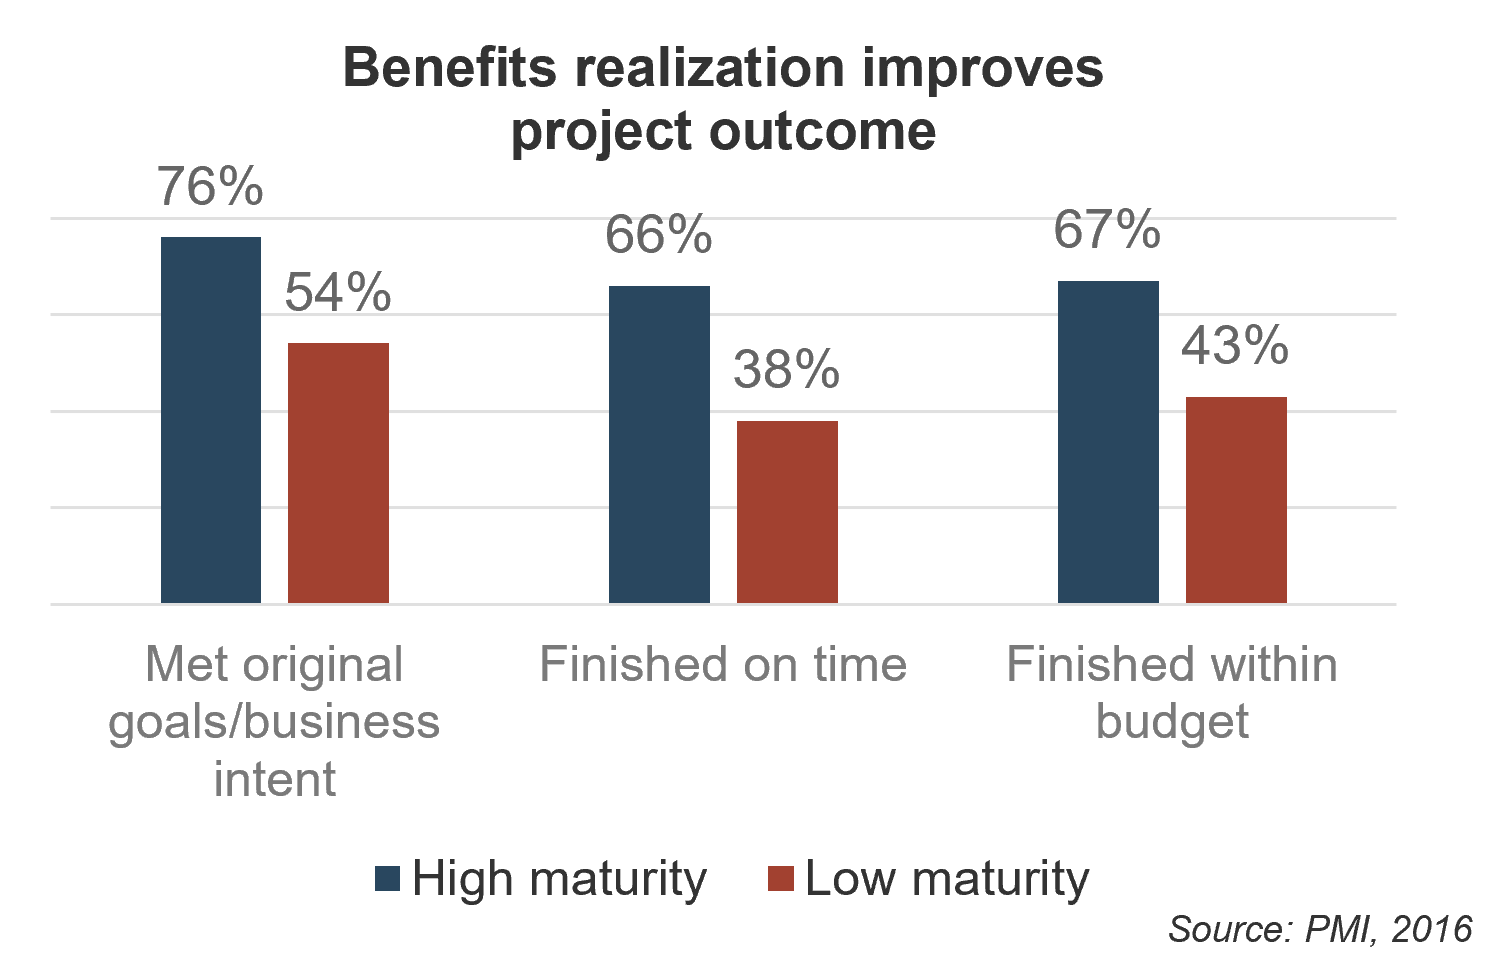 A double bar graph titled: Benefits realization improves project outcome is shown.